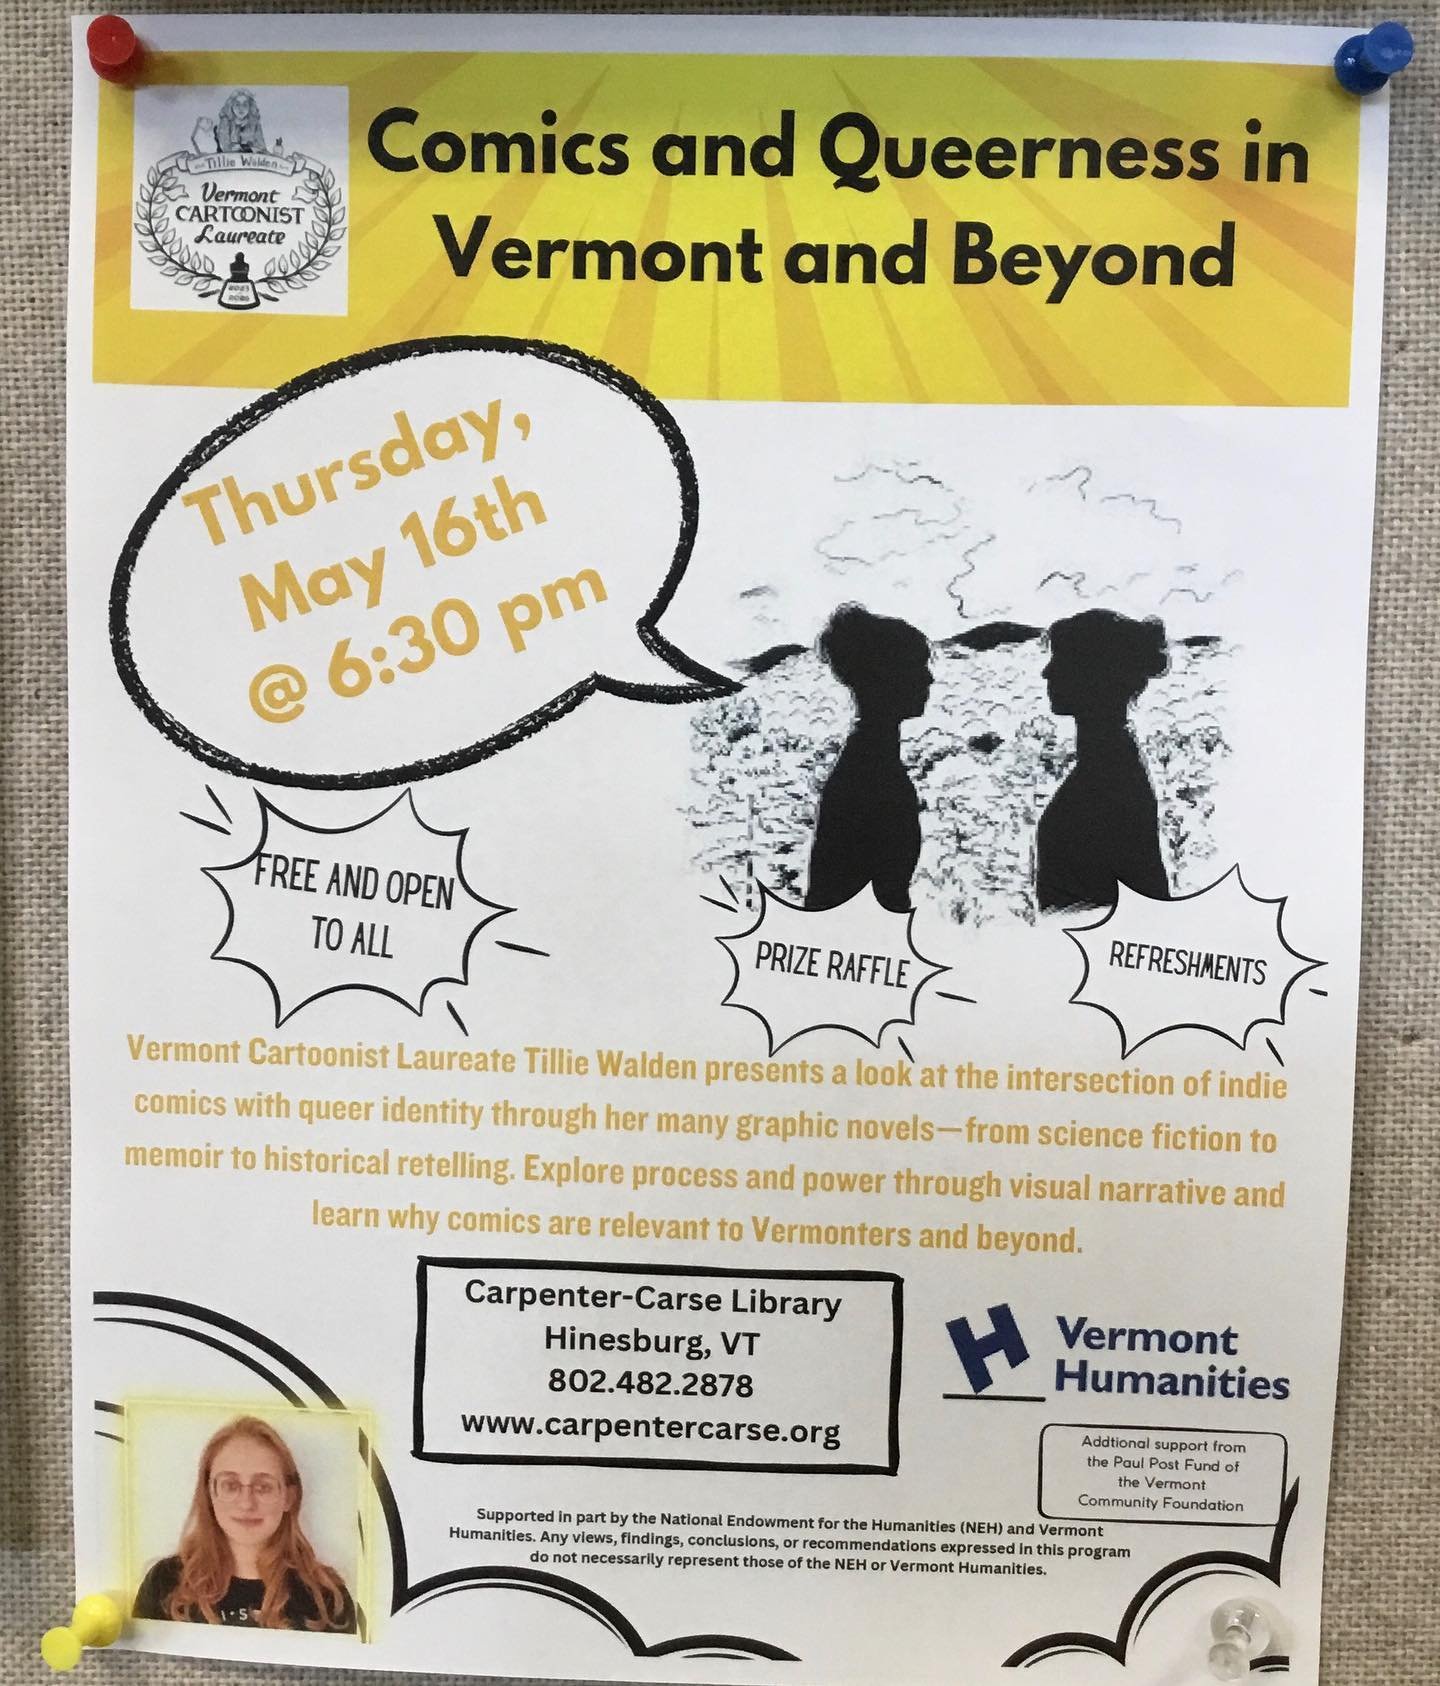 Save the date- Thursday, May 16th at 6:30pm.  @tilliewalden will be here!  Join us for an informative and interesting talk with this local artist and author who happens to be Vermont&rsquo;s Cartoonist Laureate.  We will have refreshments and a book 